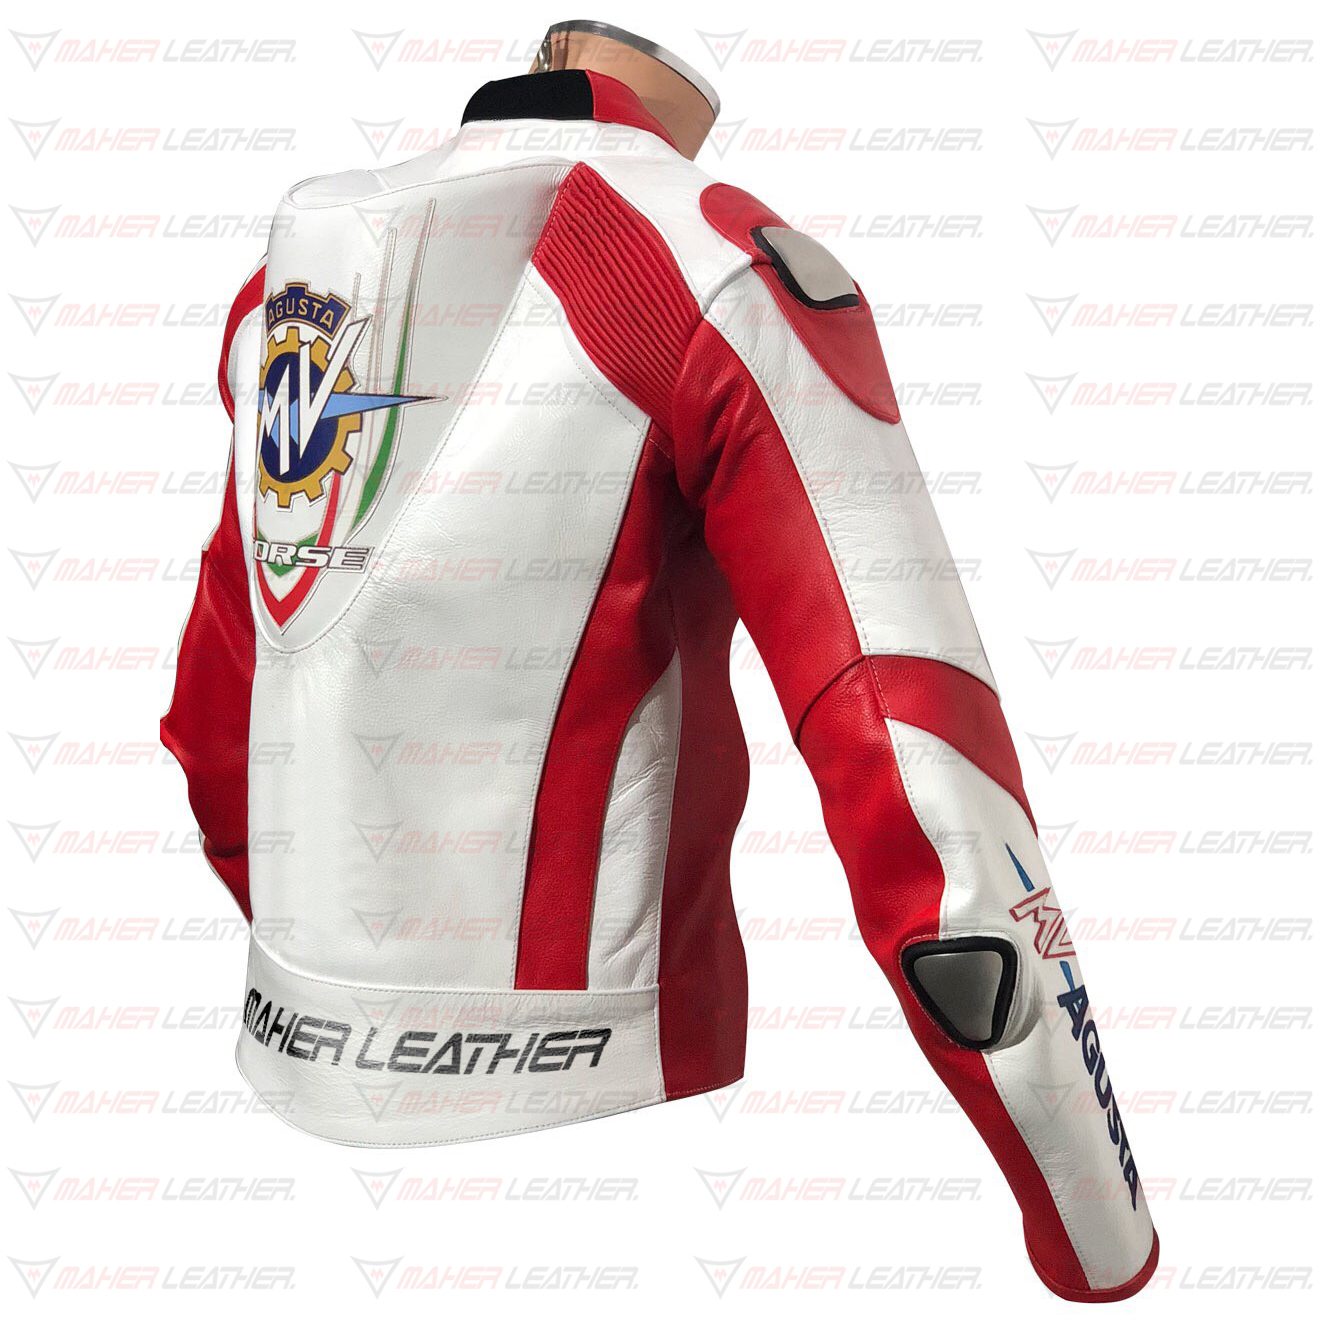 Spine protector of mv agusta motorcycle jacket